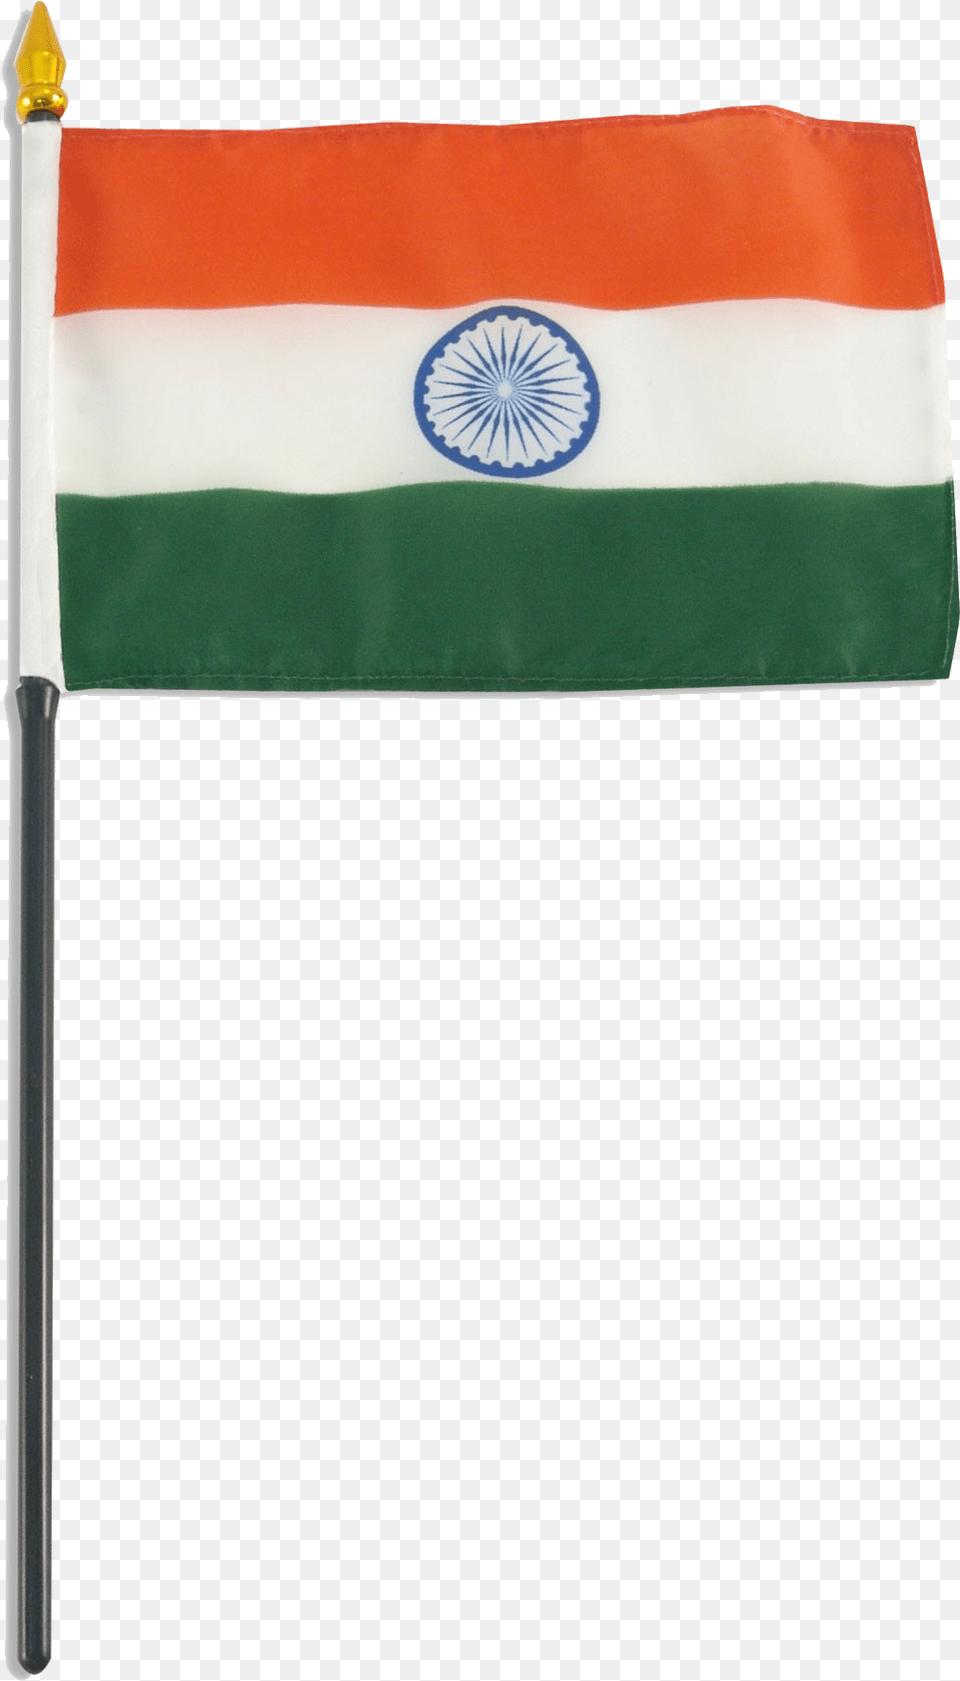 Indian Flag Free Indian Flag With Pole, India Flag Png Image